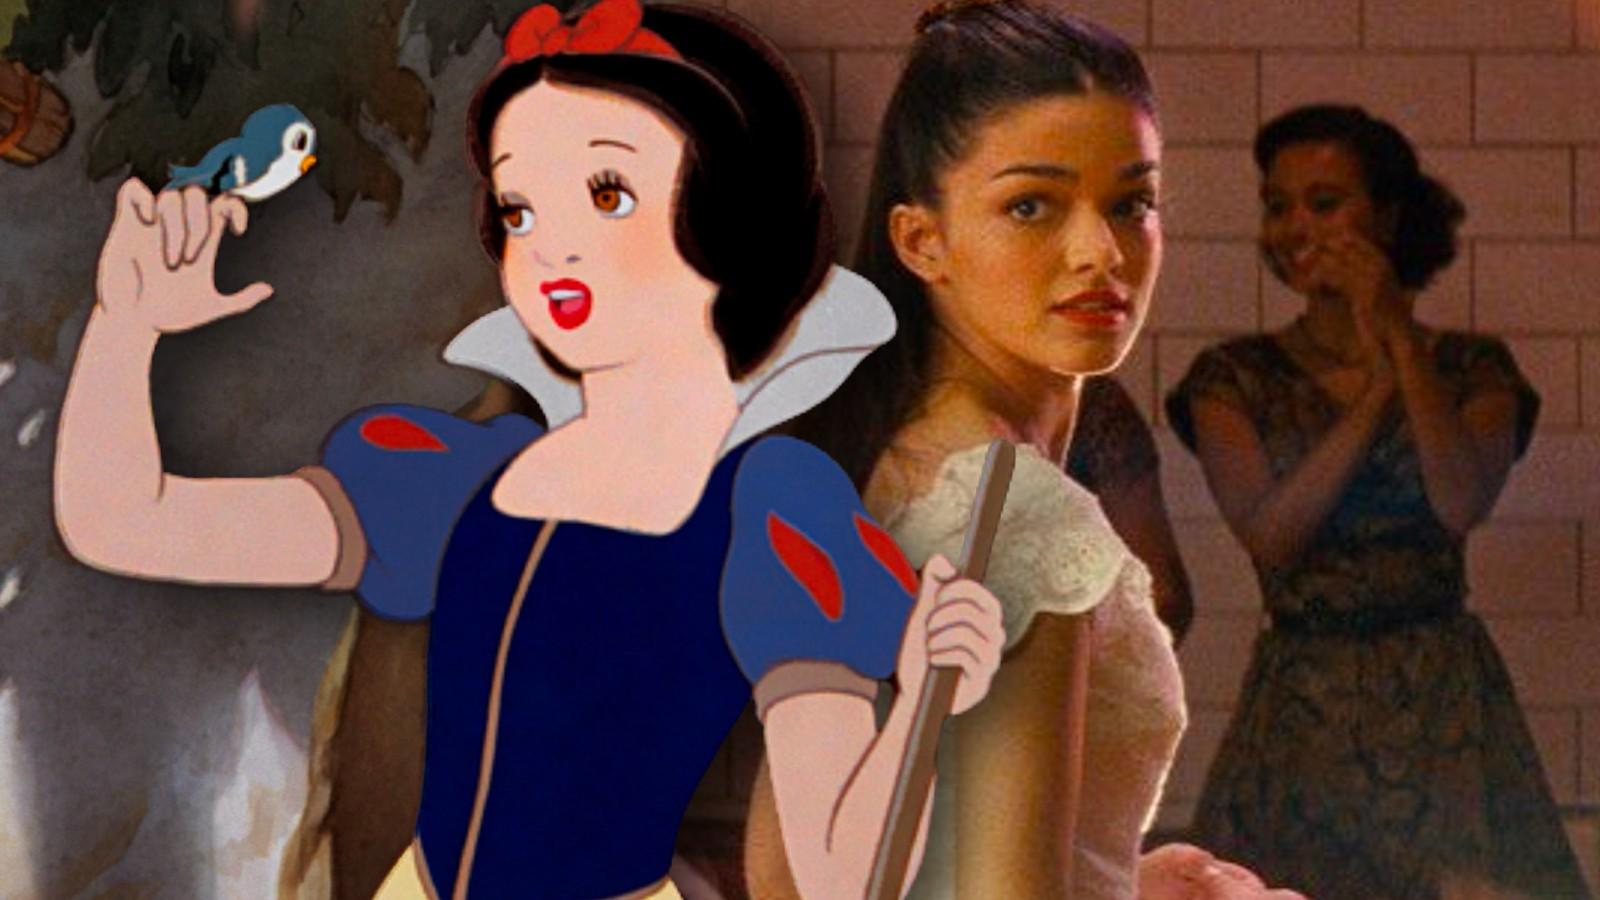 A still from Disney's Snow White and Rachel Zegler in the West Side Story remake